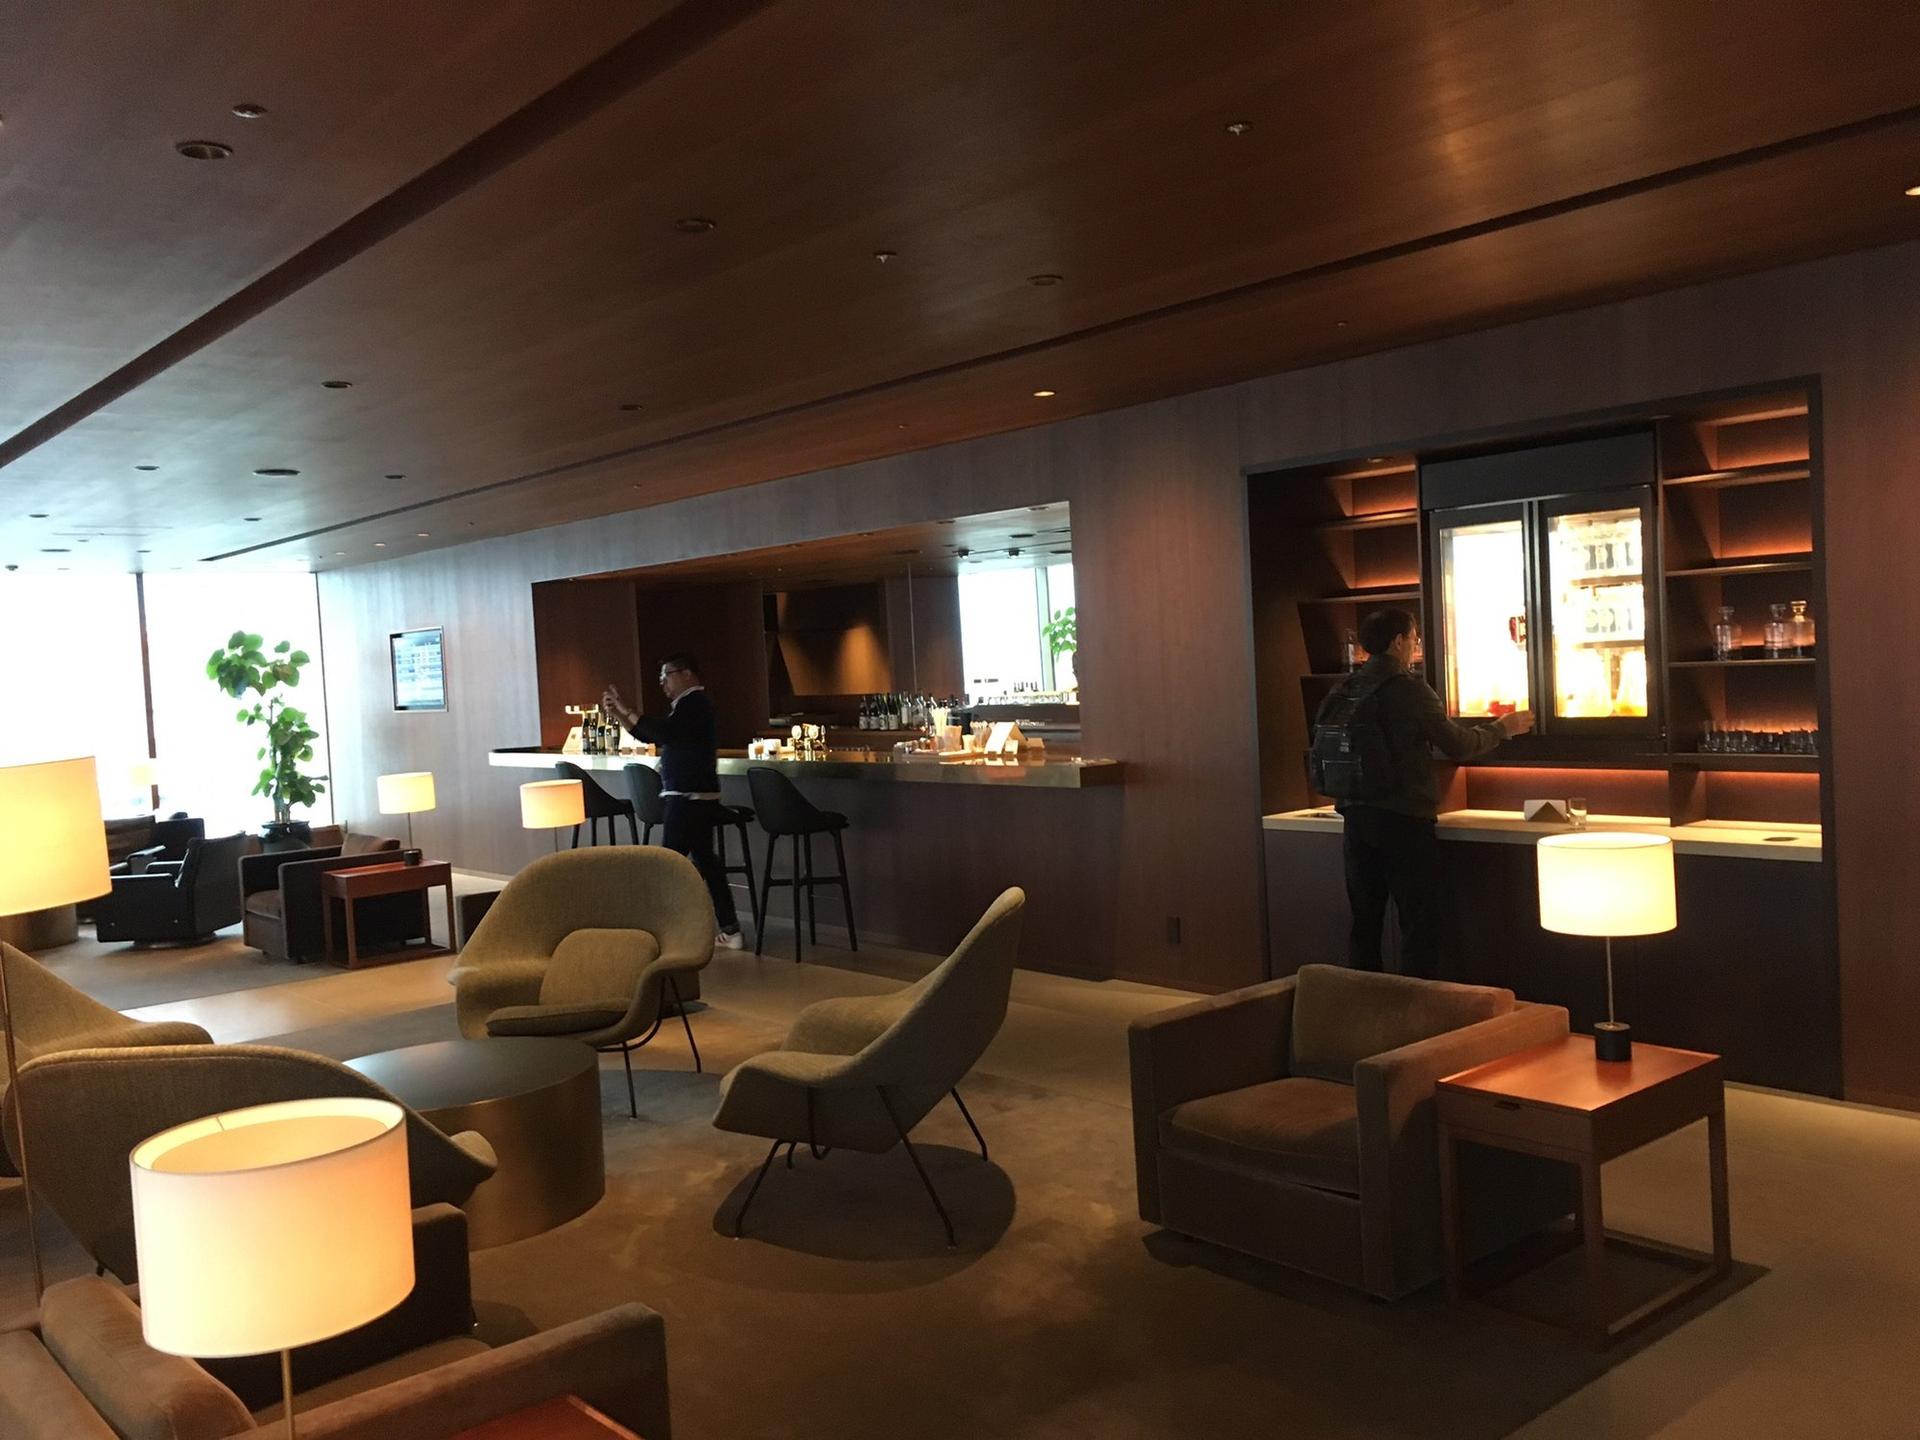 Cathay Pacific Lounge image 22 of 49